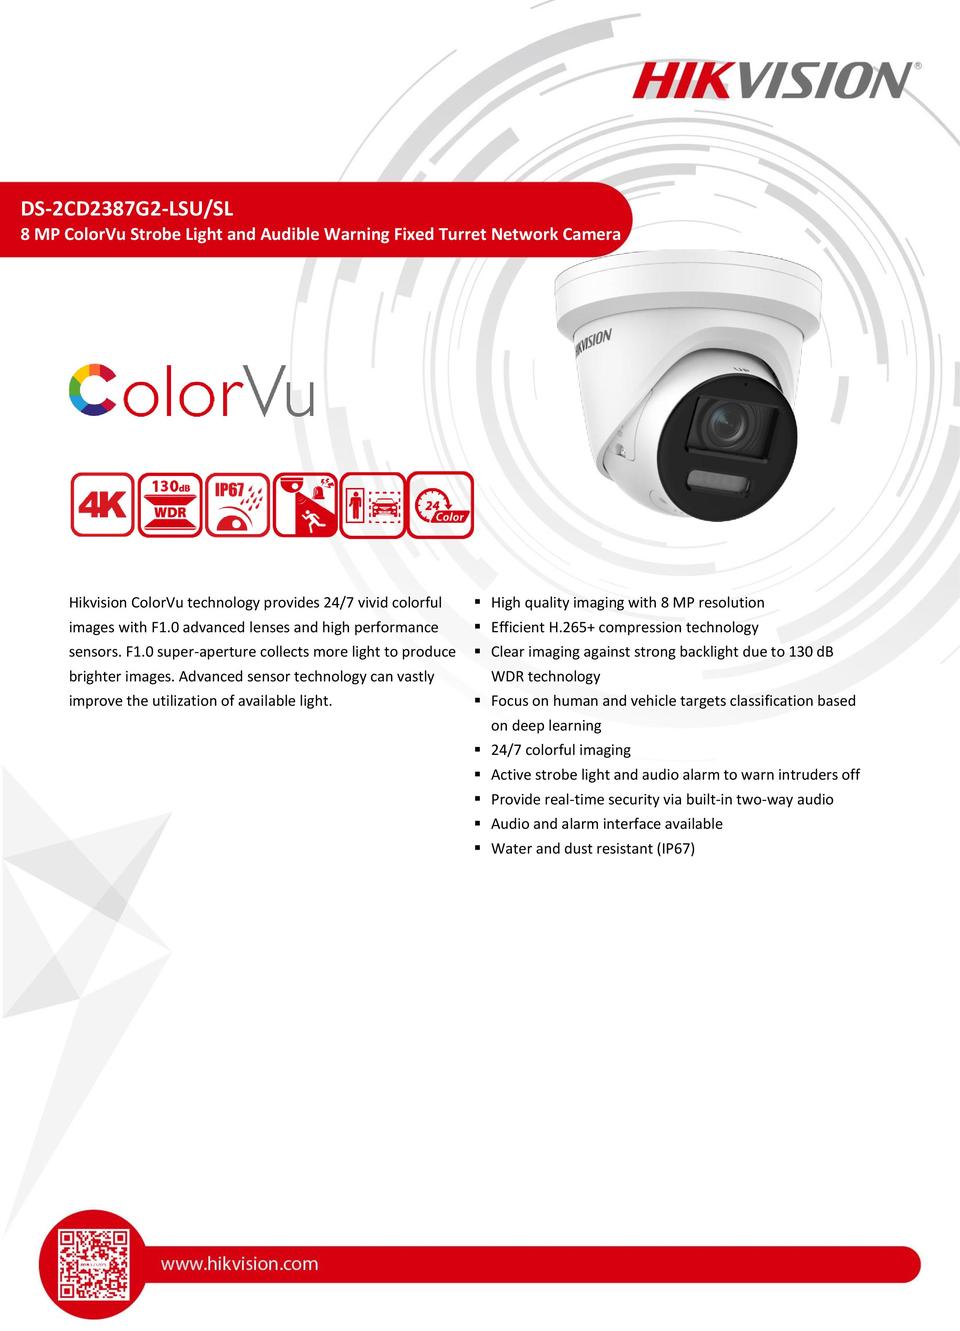 Hikvision DS-2CD2387G2-LSU/SL 8MP ColorVu with Acusense Turret Camera with 2.8mm Lens (2 available) 0